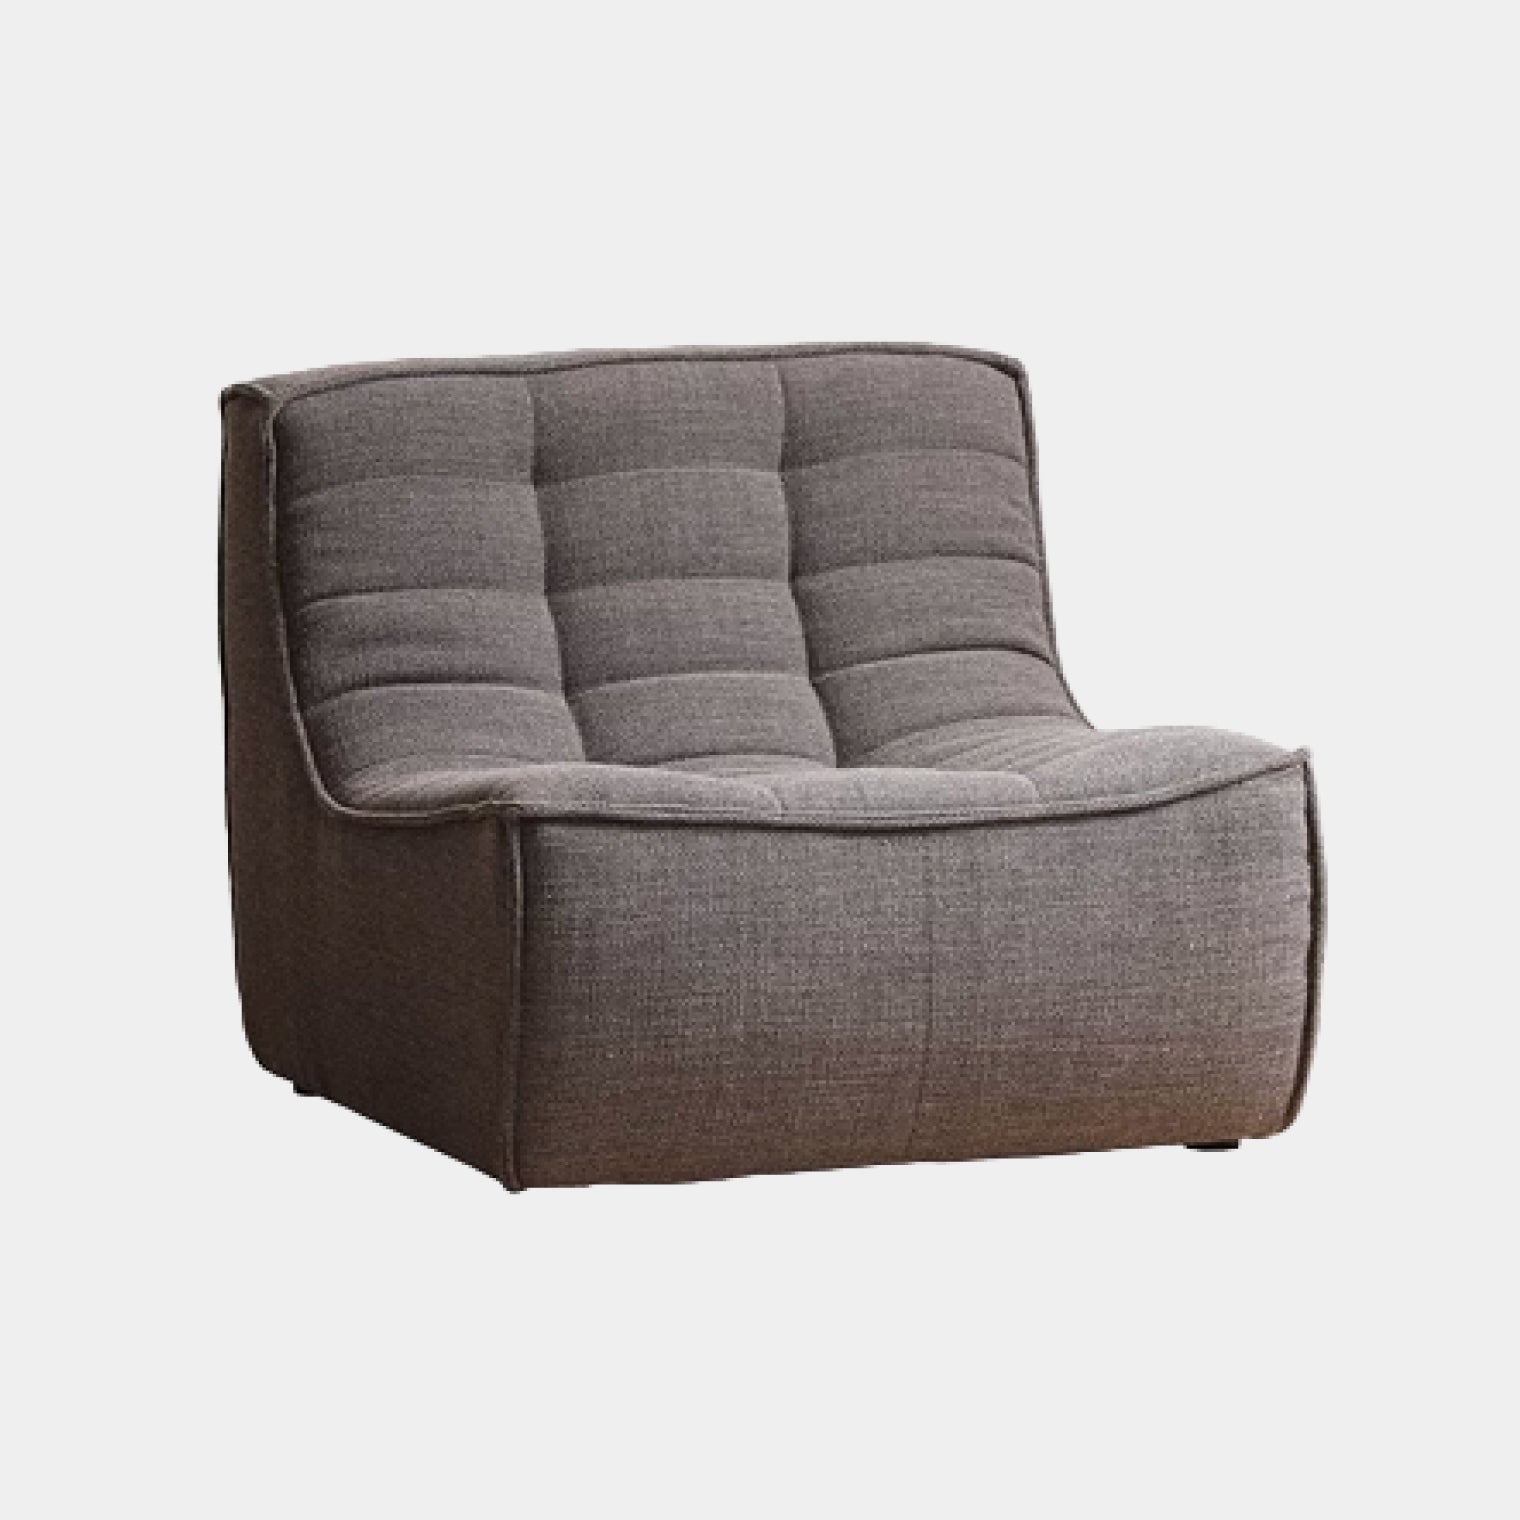 Amber Armless 3 Seater, Grey